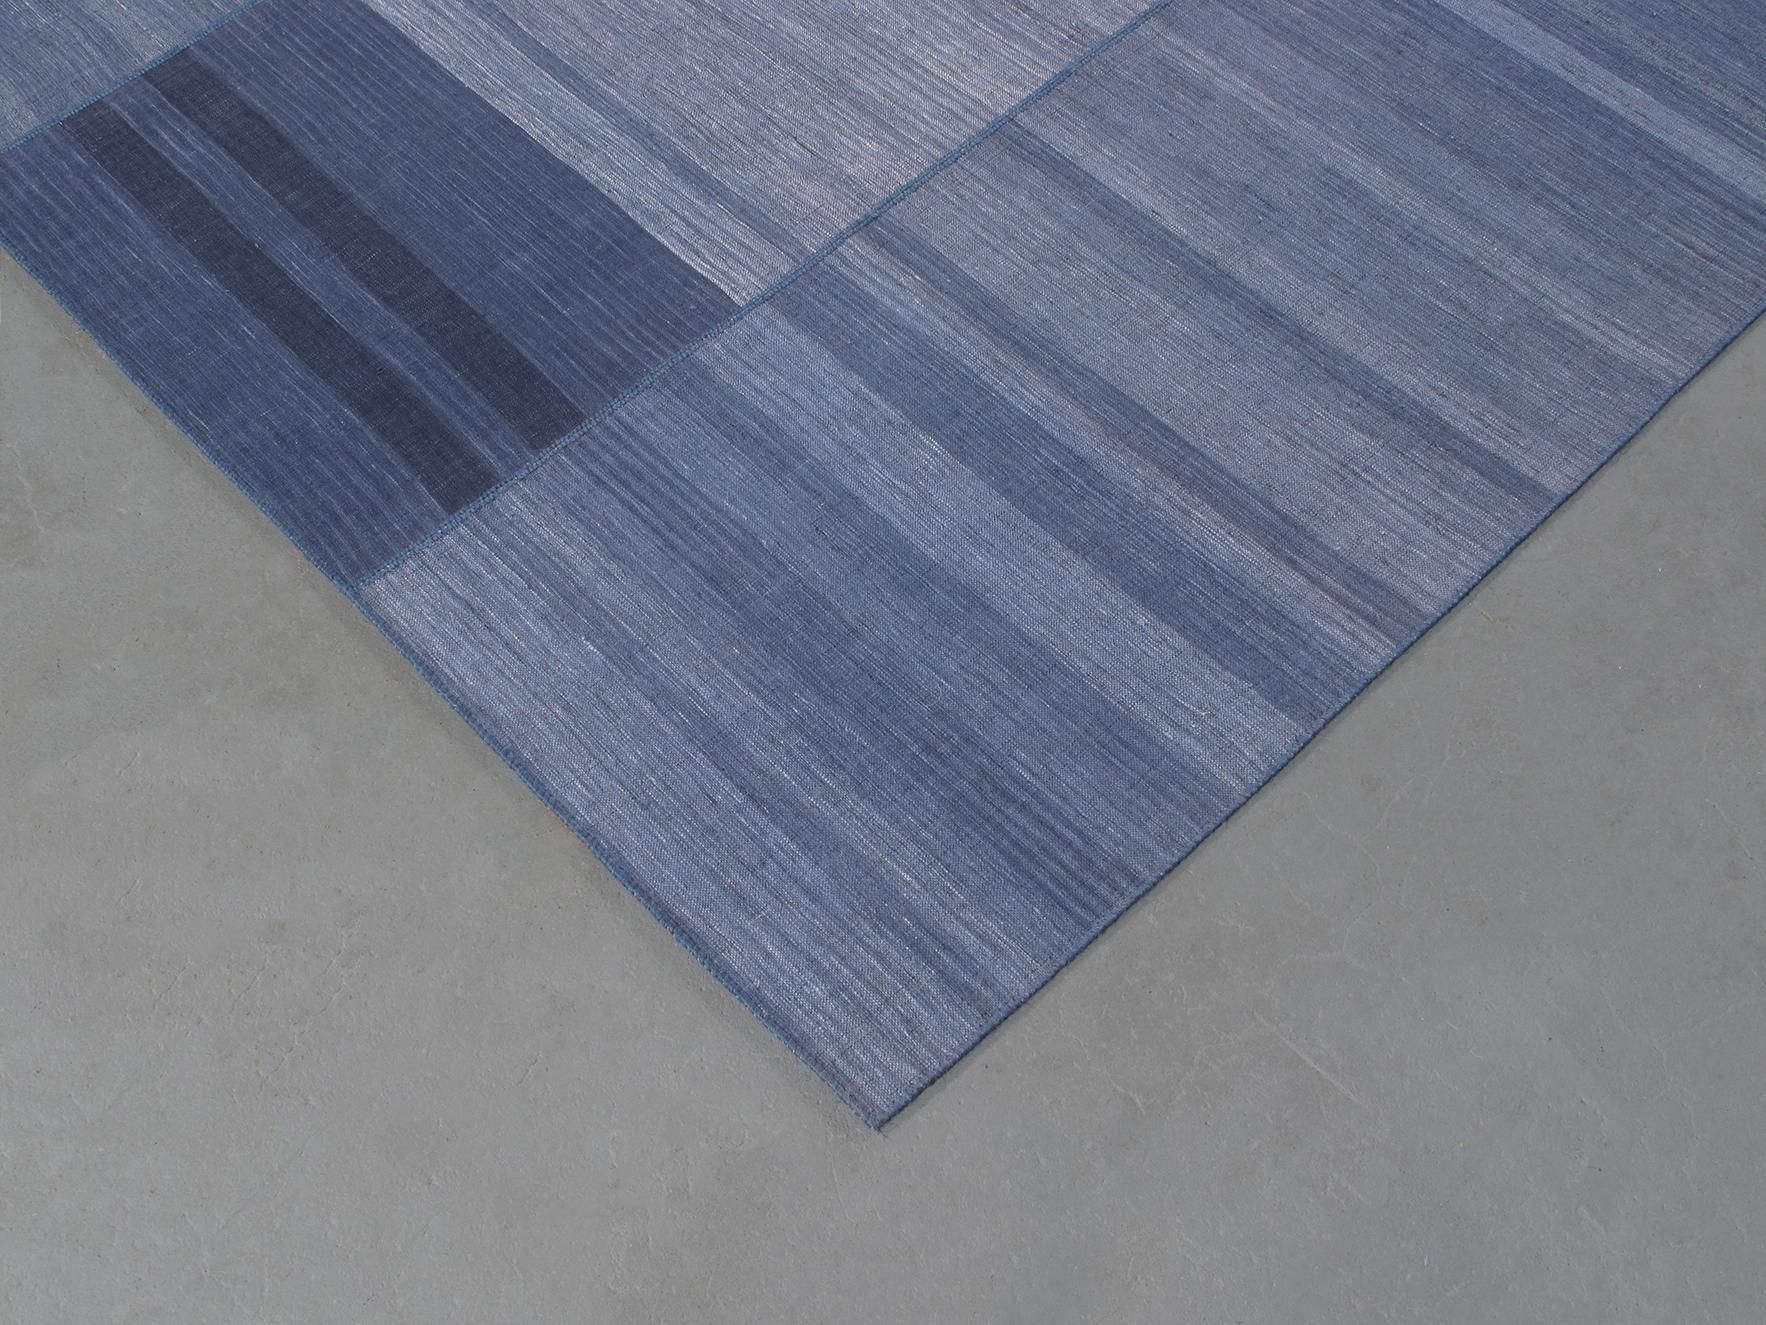 Vintage Mid-Century Modern Pelas Handwoven Flatweave Rug in Shades of Blue In Excellent Condition For Sale In New York, NY